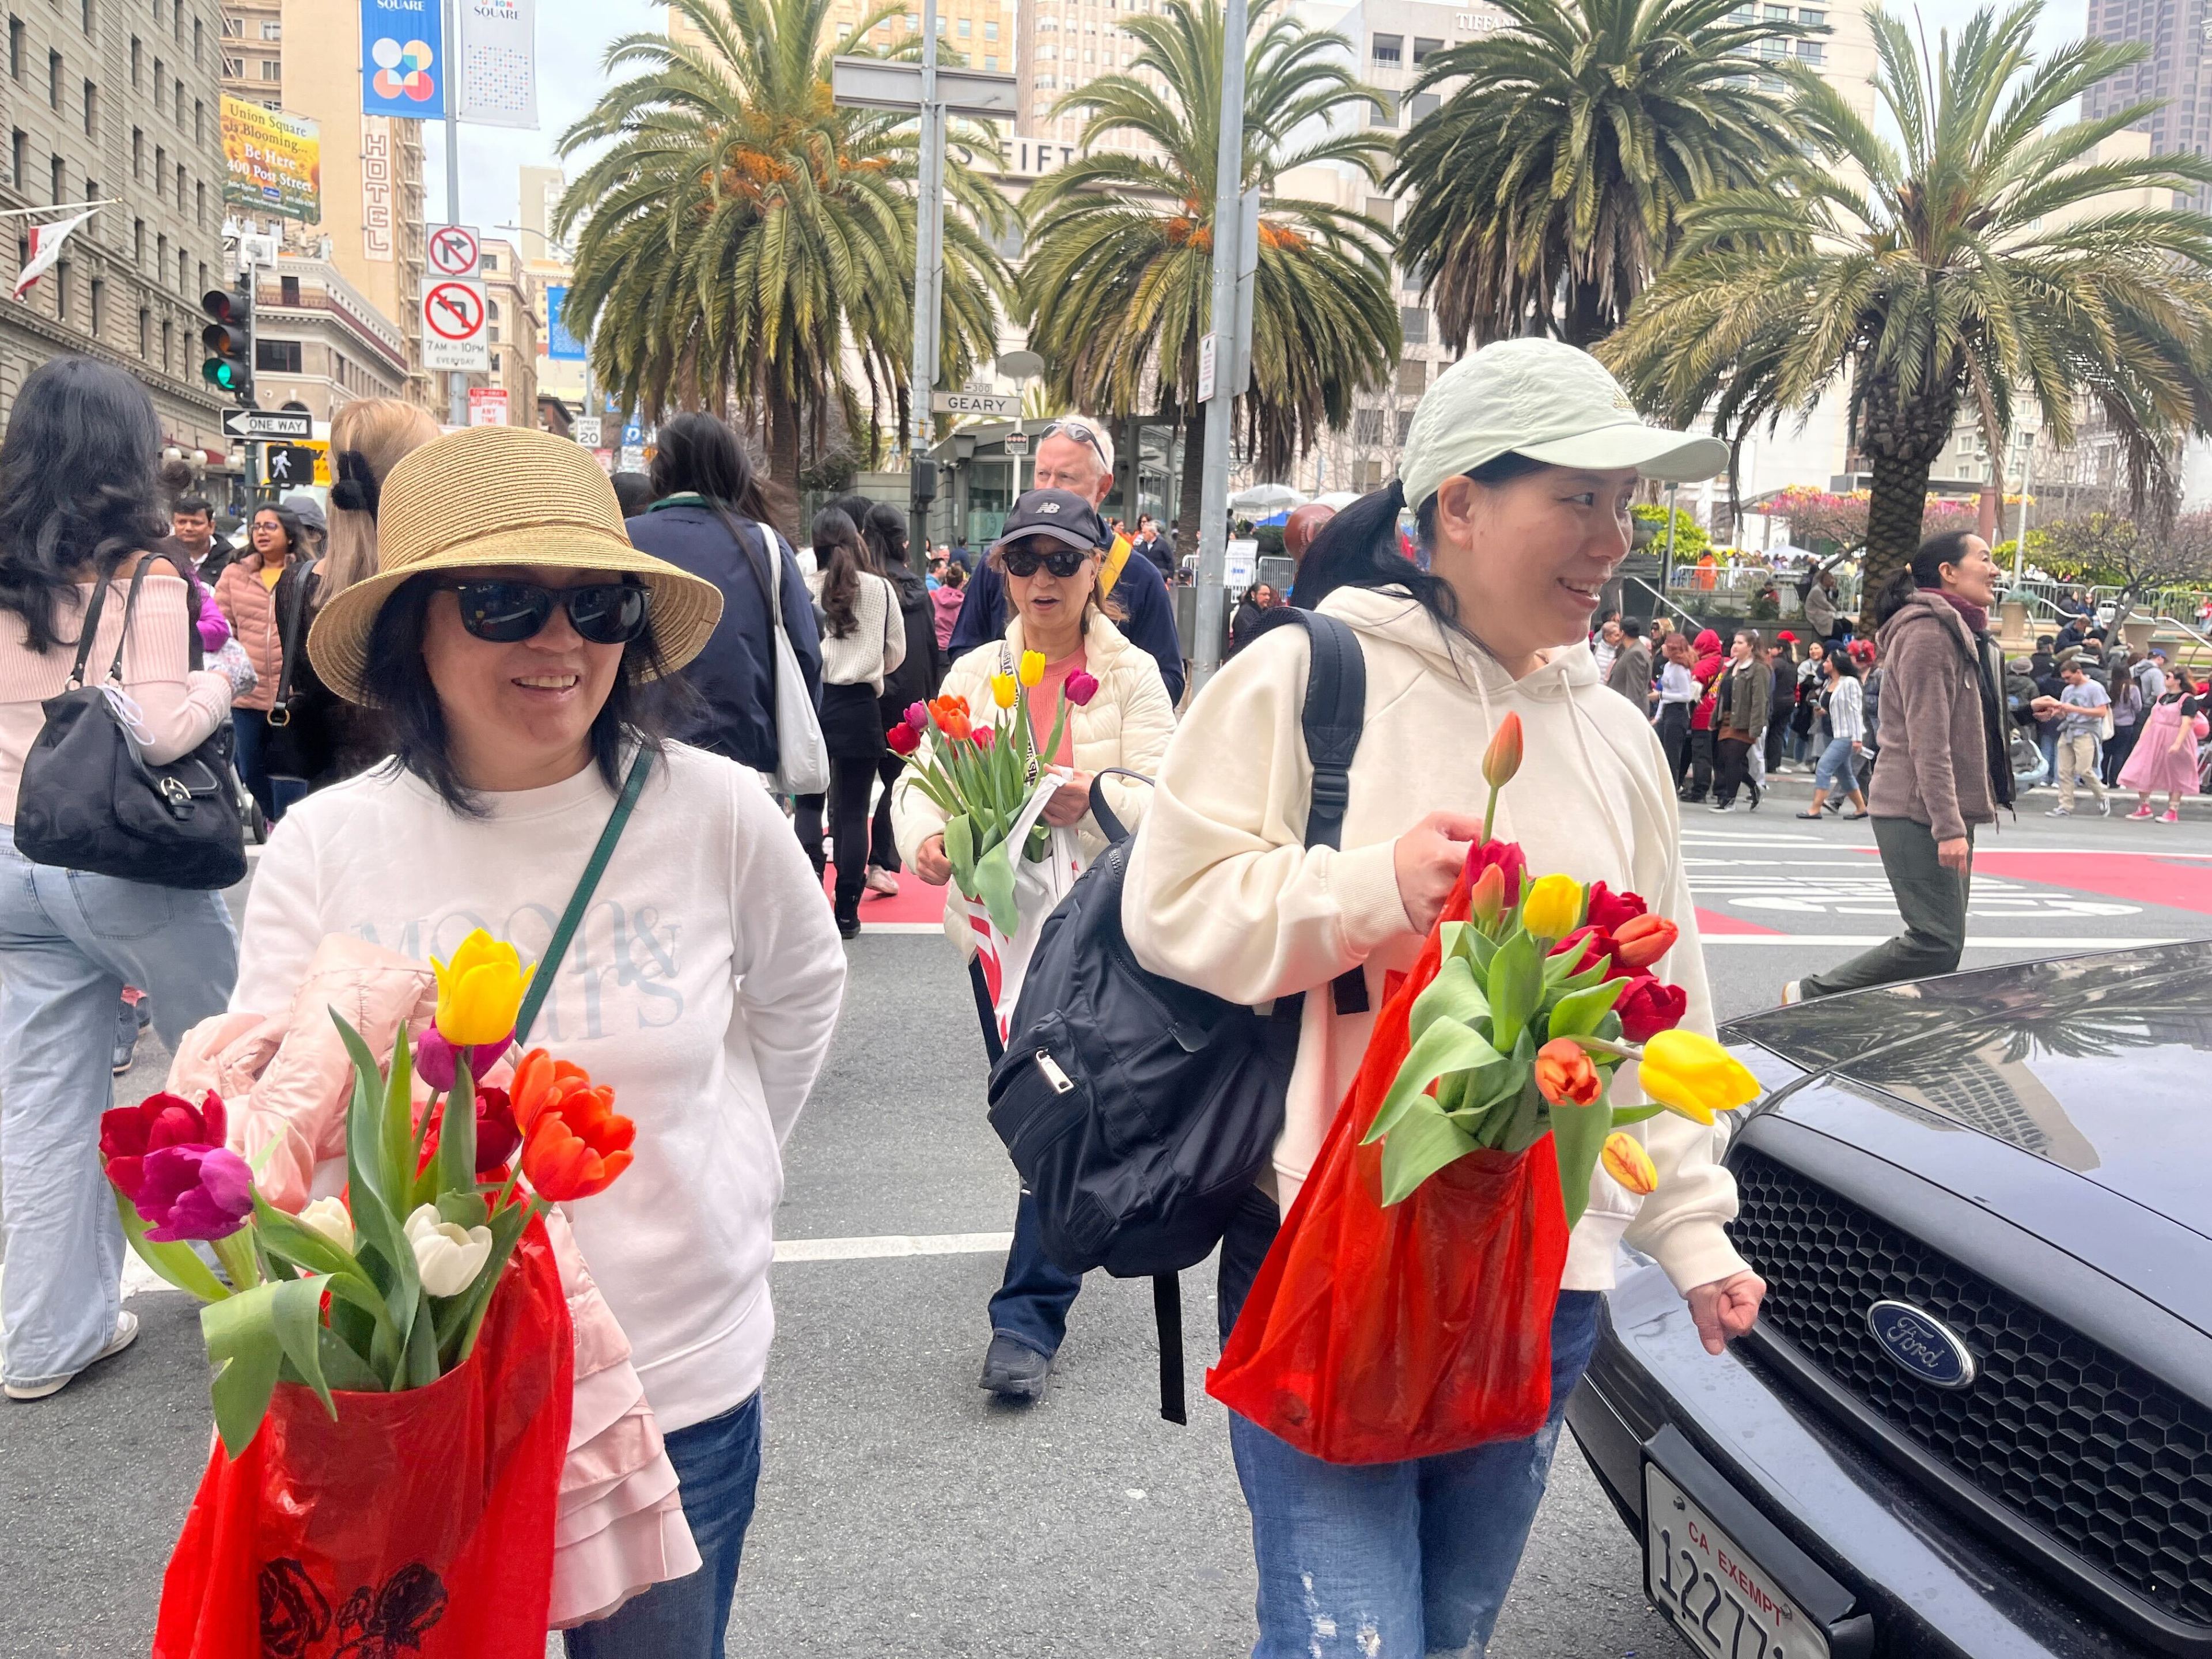 Two smiling women with hats and bouquets of tulips cross a busy city street with palm trees in the background.